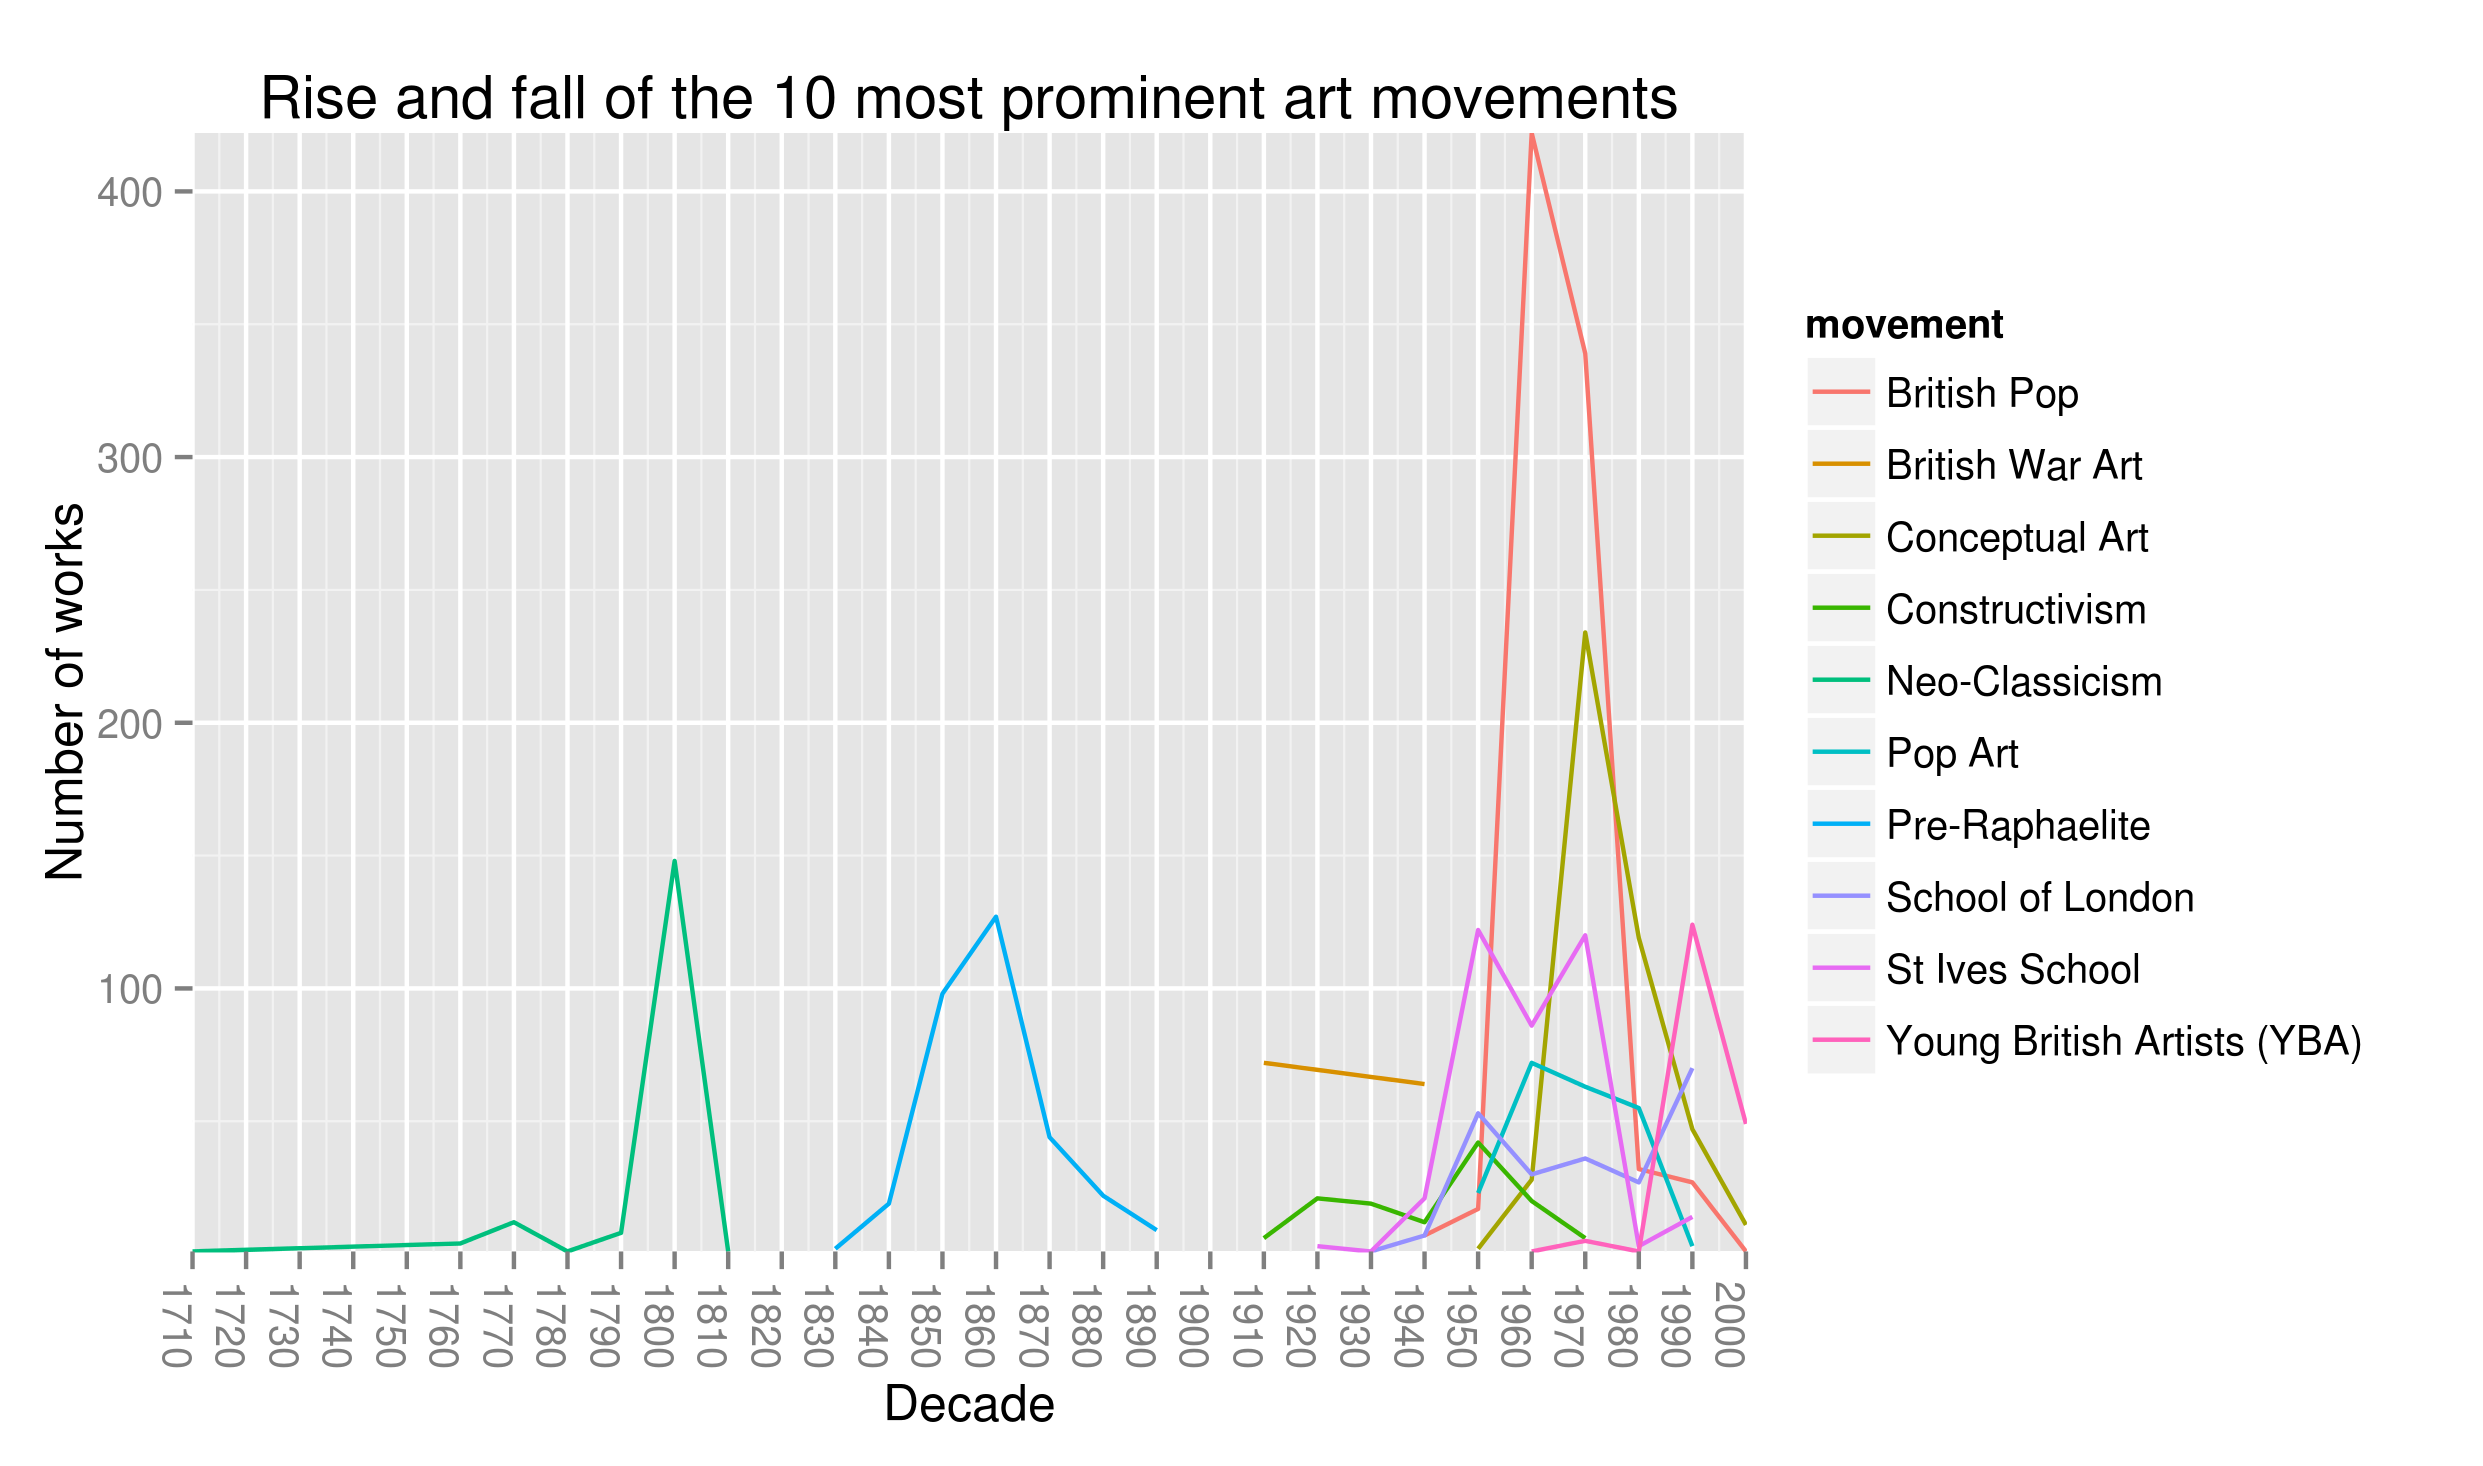 Most prominent movements in the Tate collections